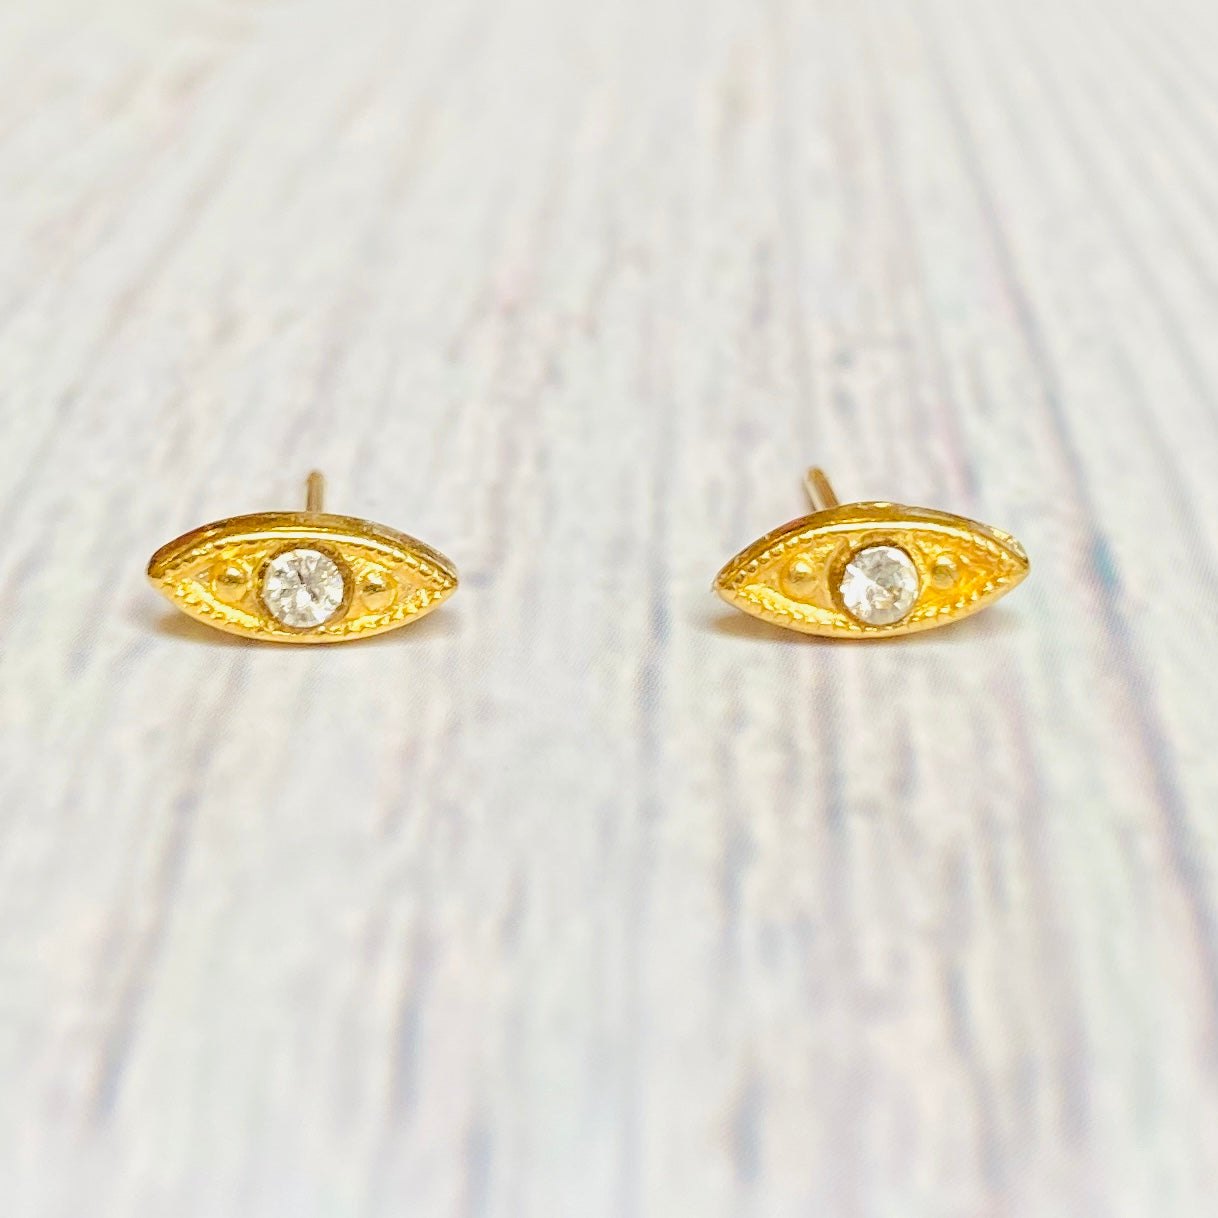 Gold plated brass eyes stud earrings with crystals.